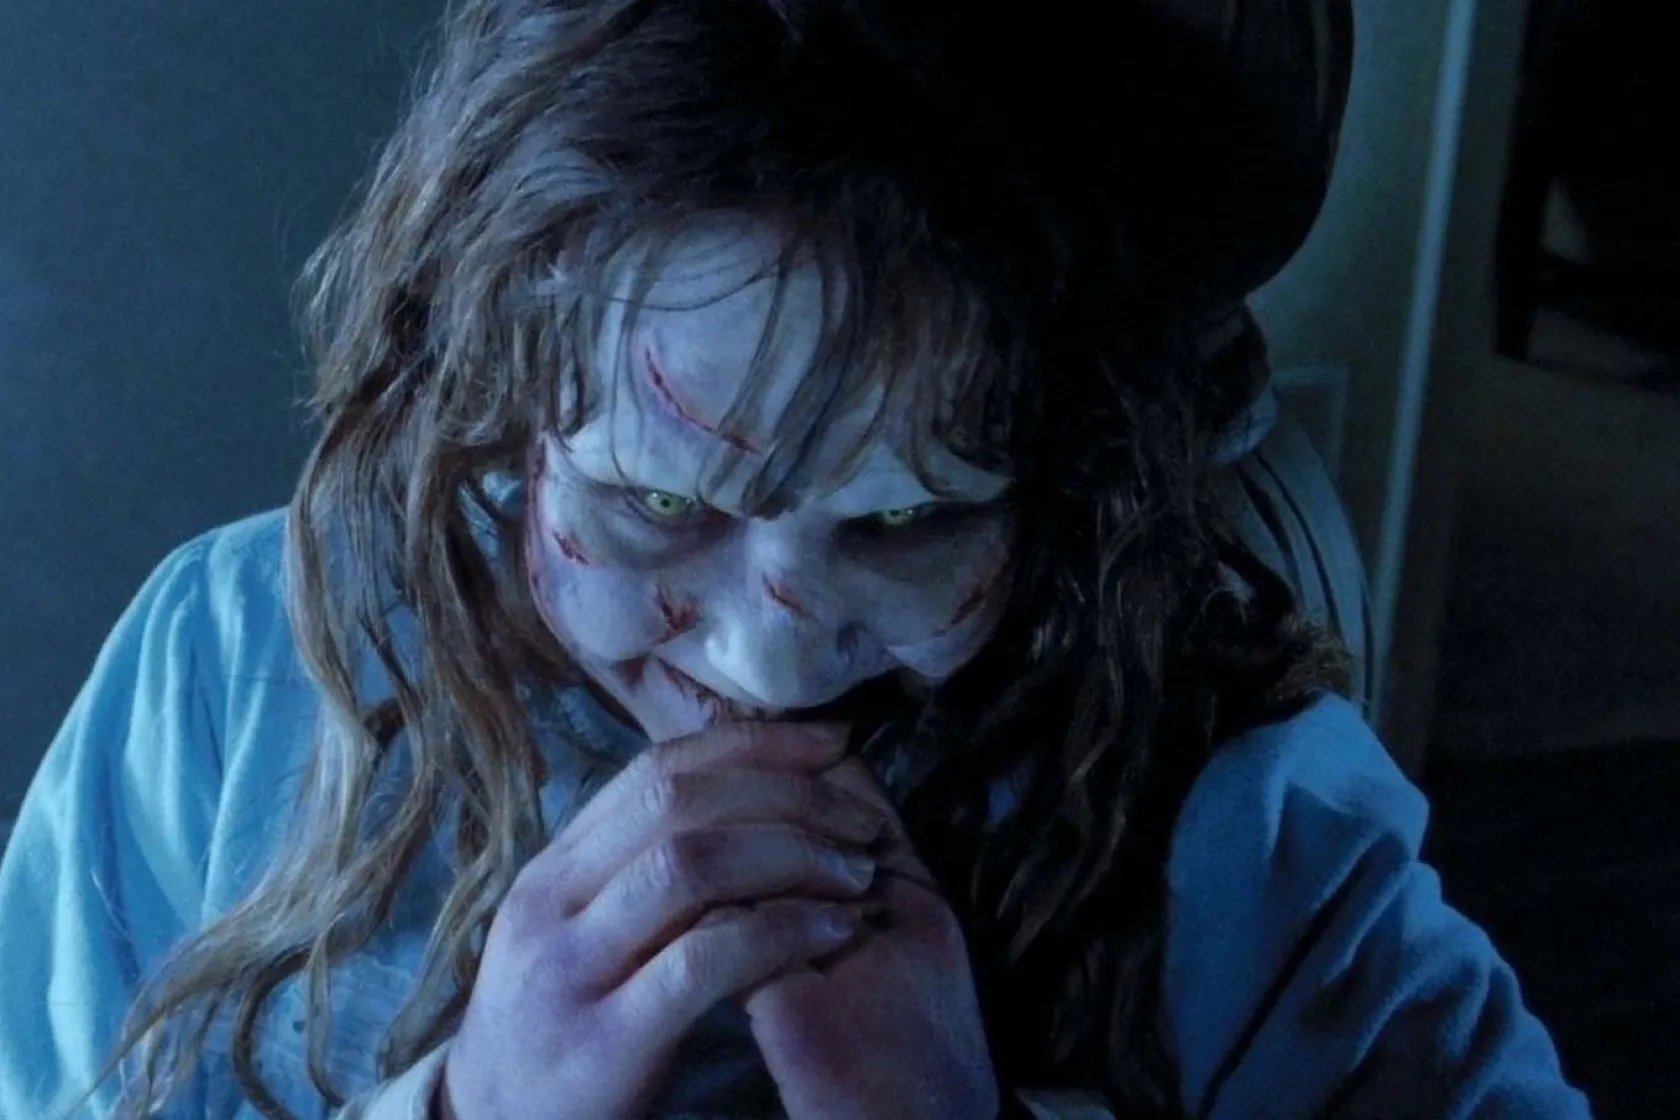 As ‘The Exorcist’ turns 50, some things to look for in the scariest movie ever